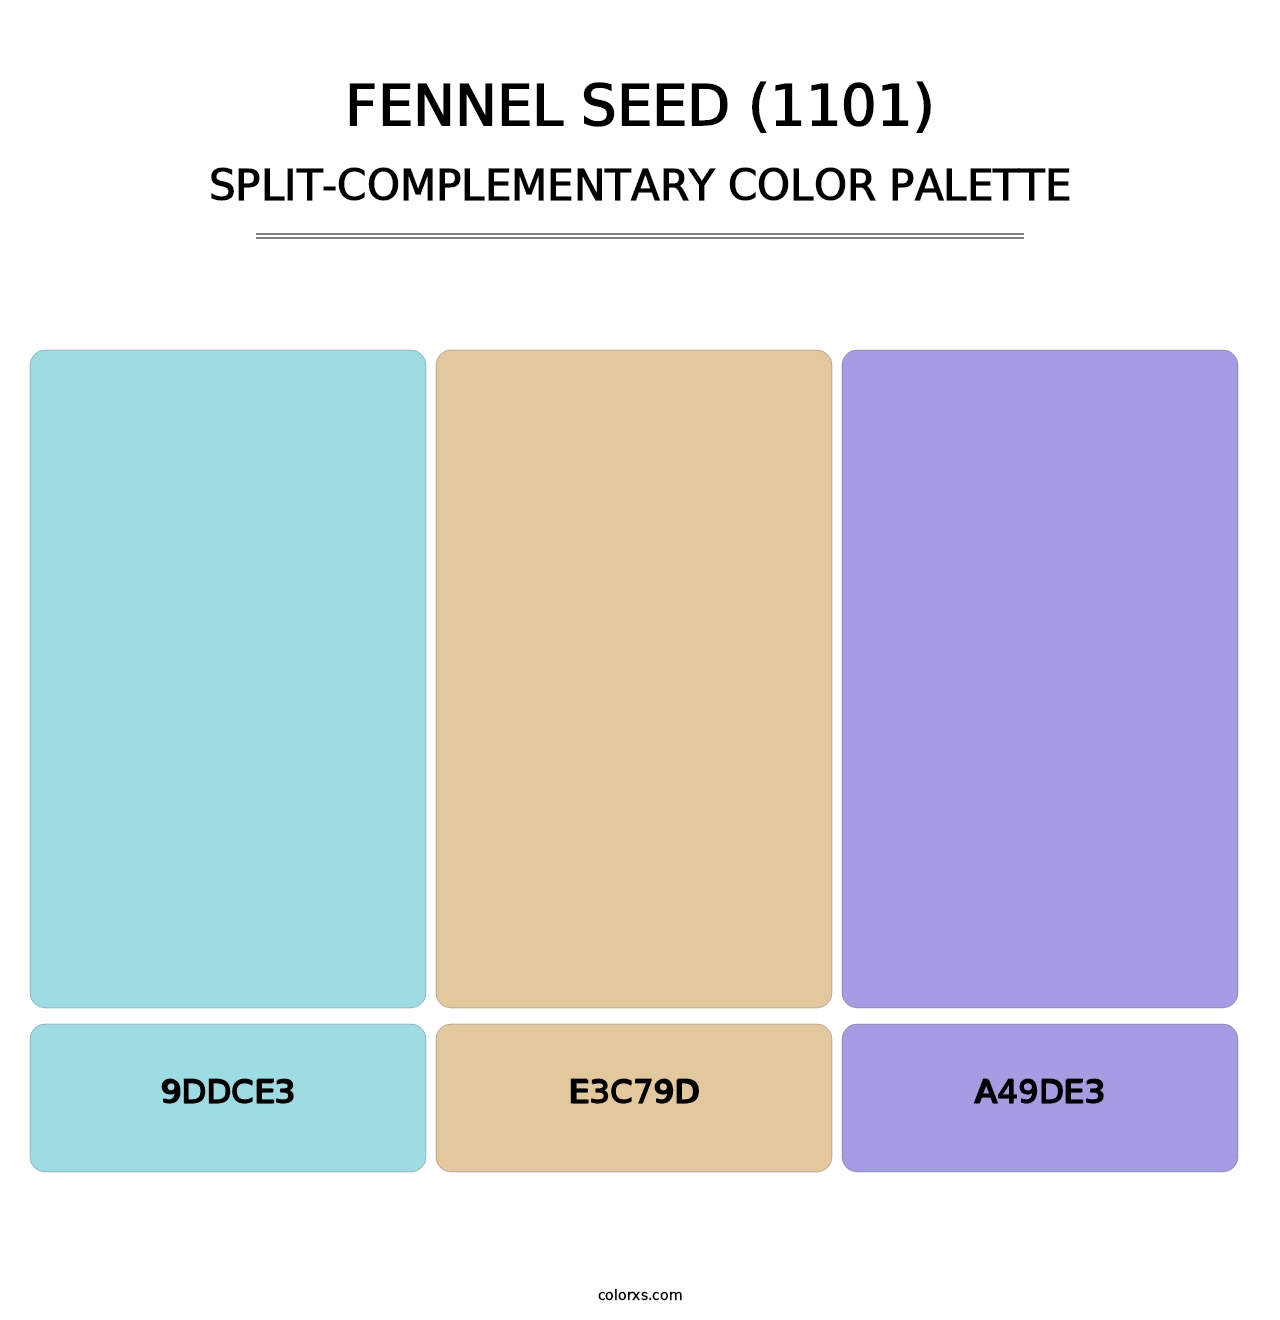 Fennel Seed (1101) - Split-Complementary Color Palette